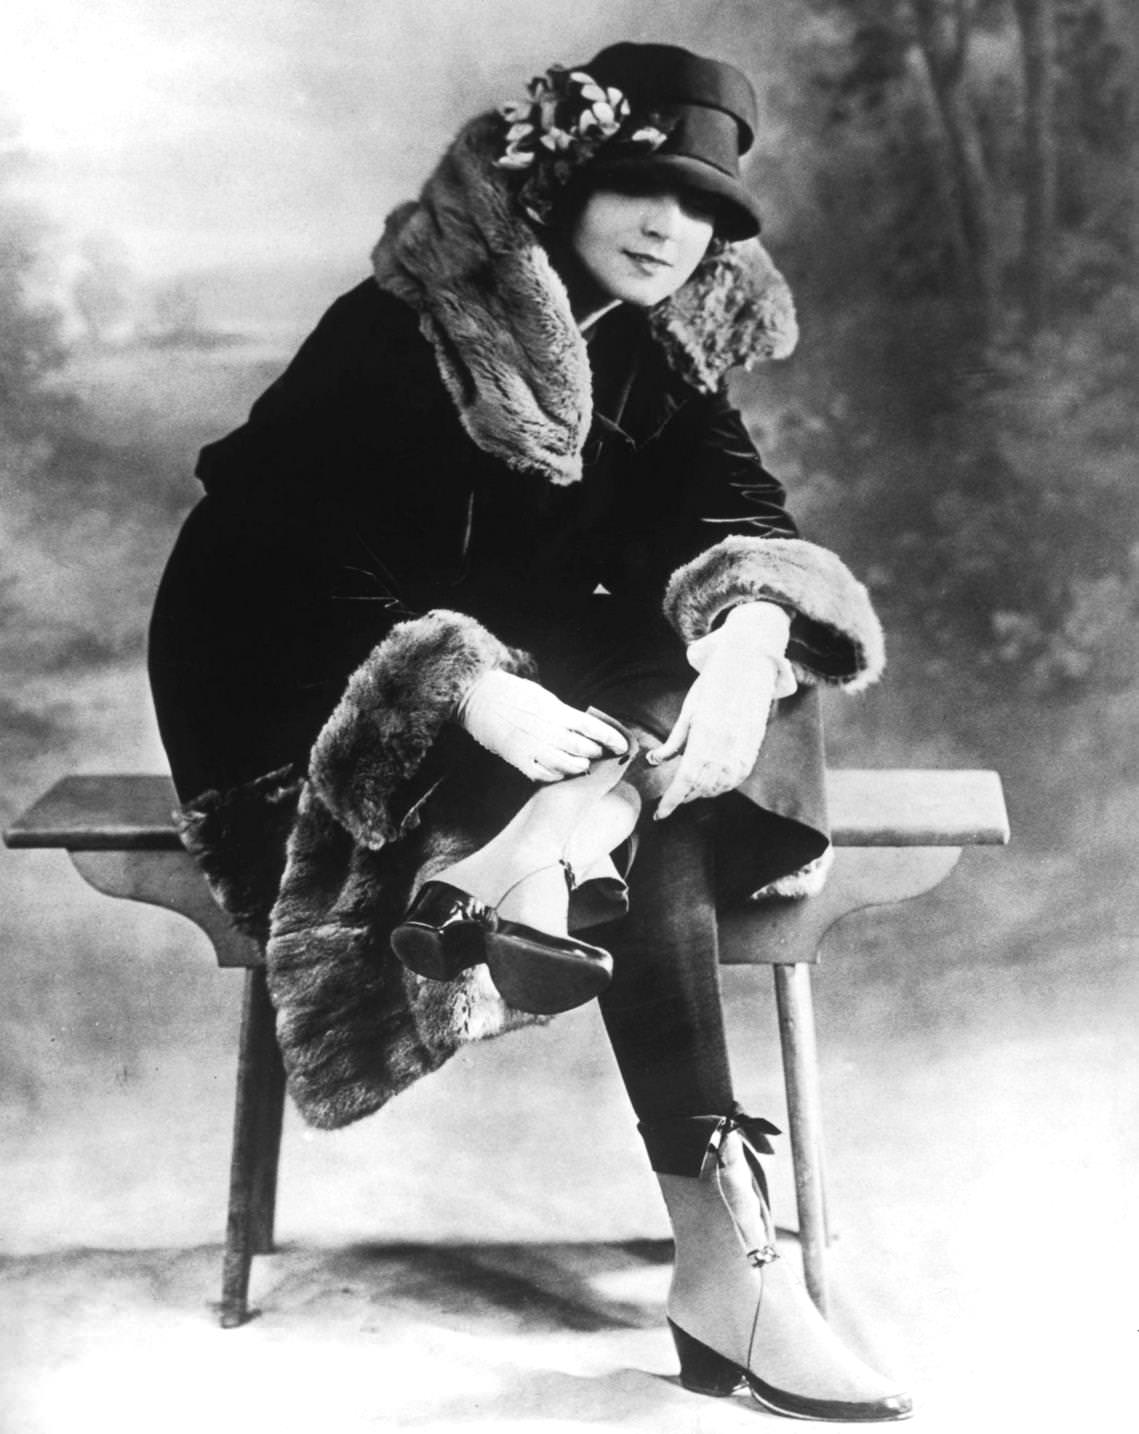 A woman in a winter outfit of fur-trimmed coat and boots with spats, 1925.